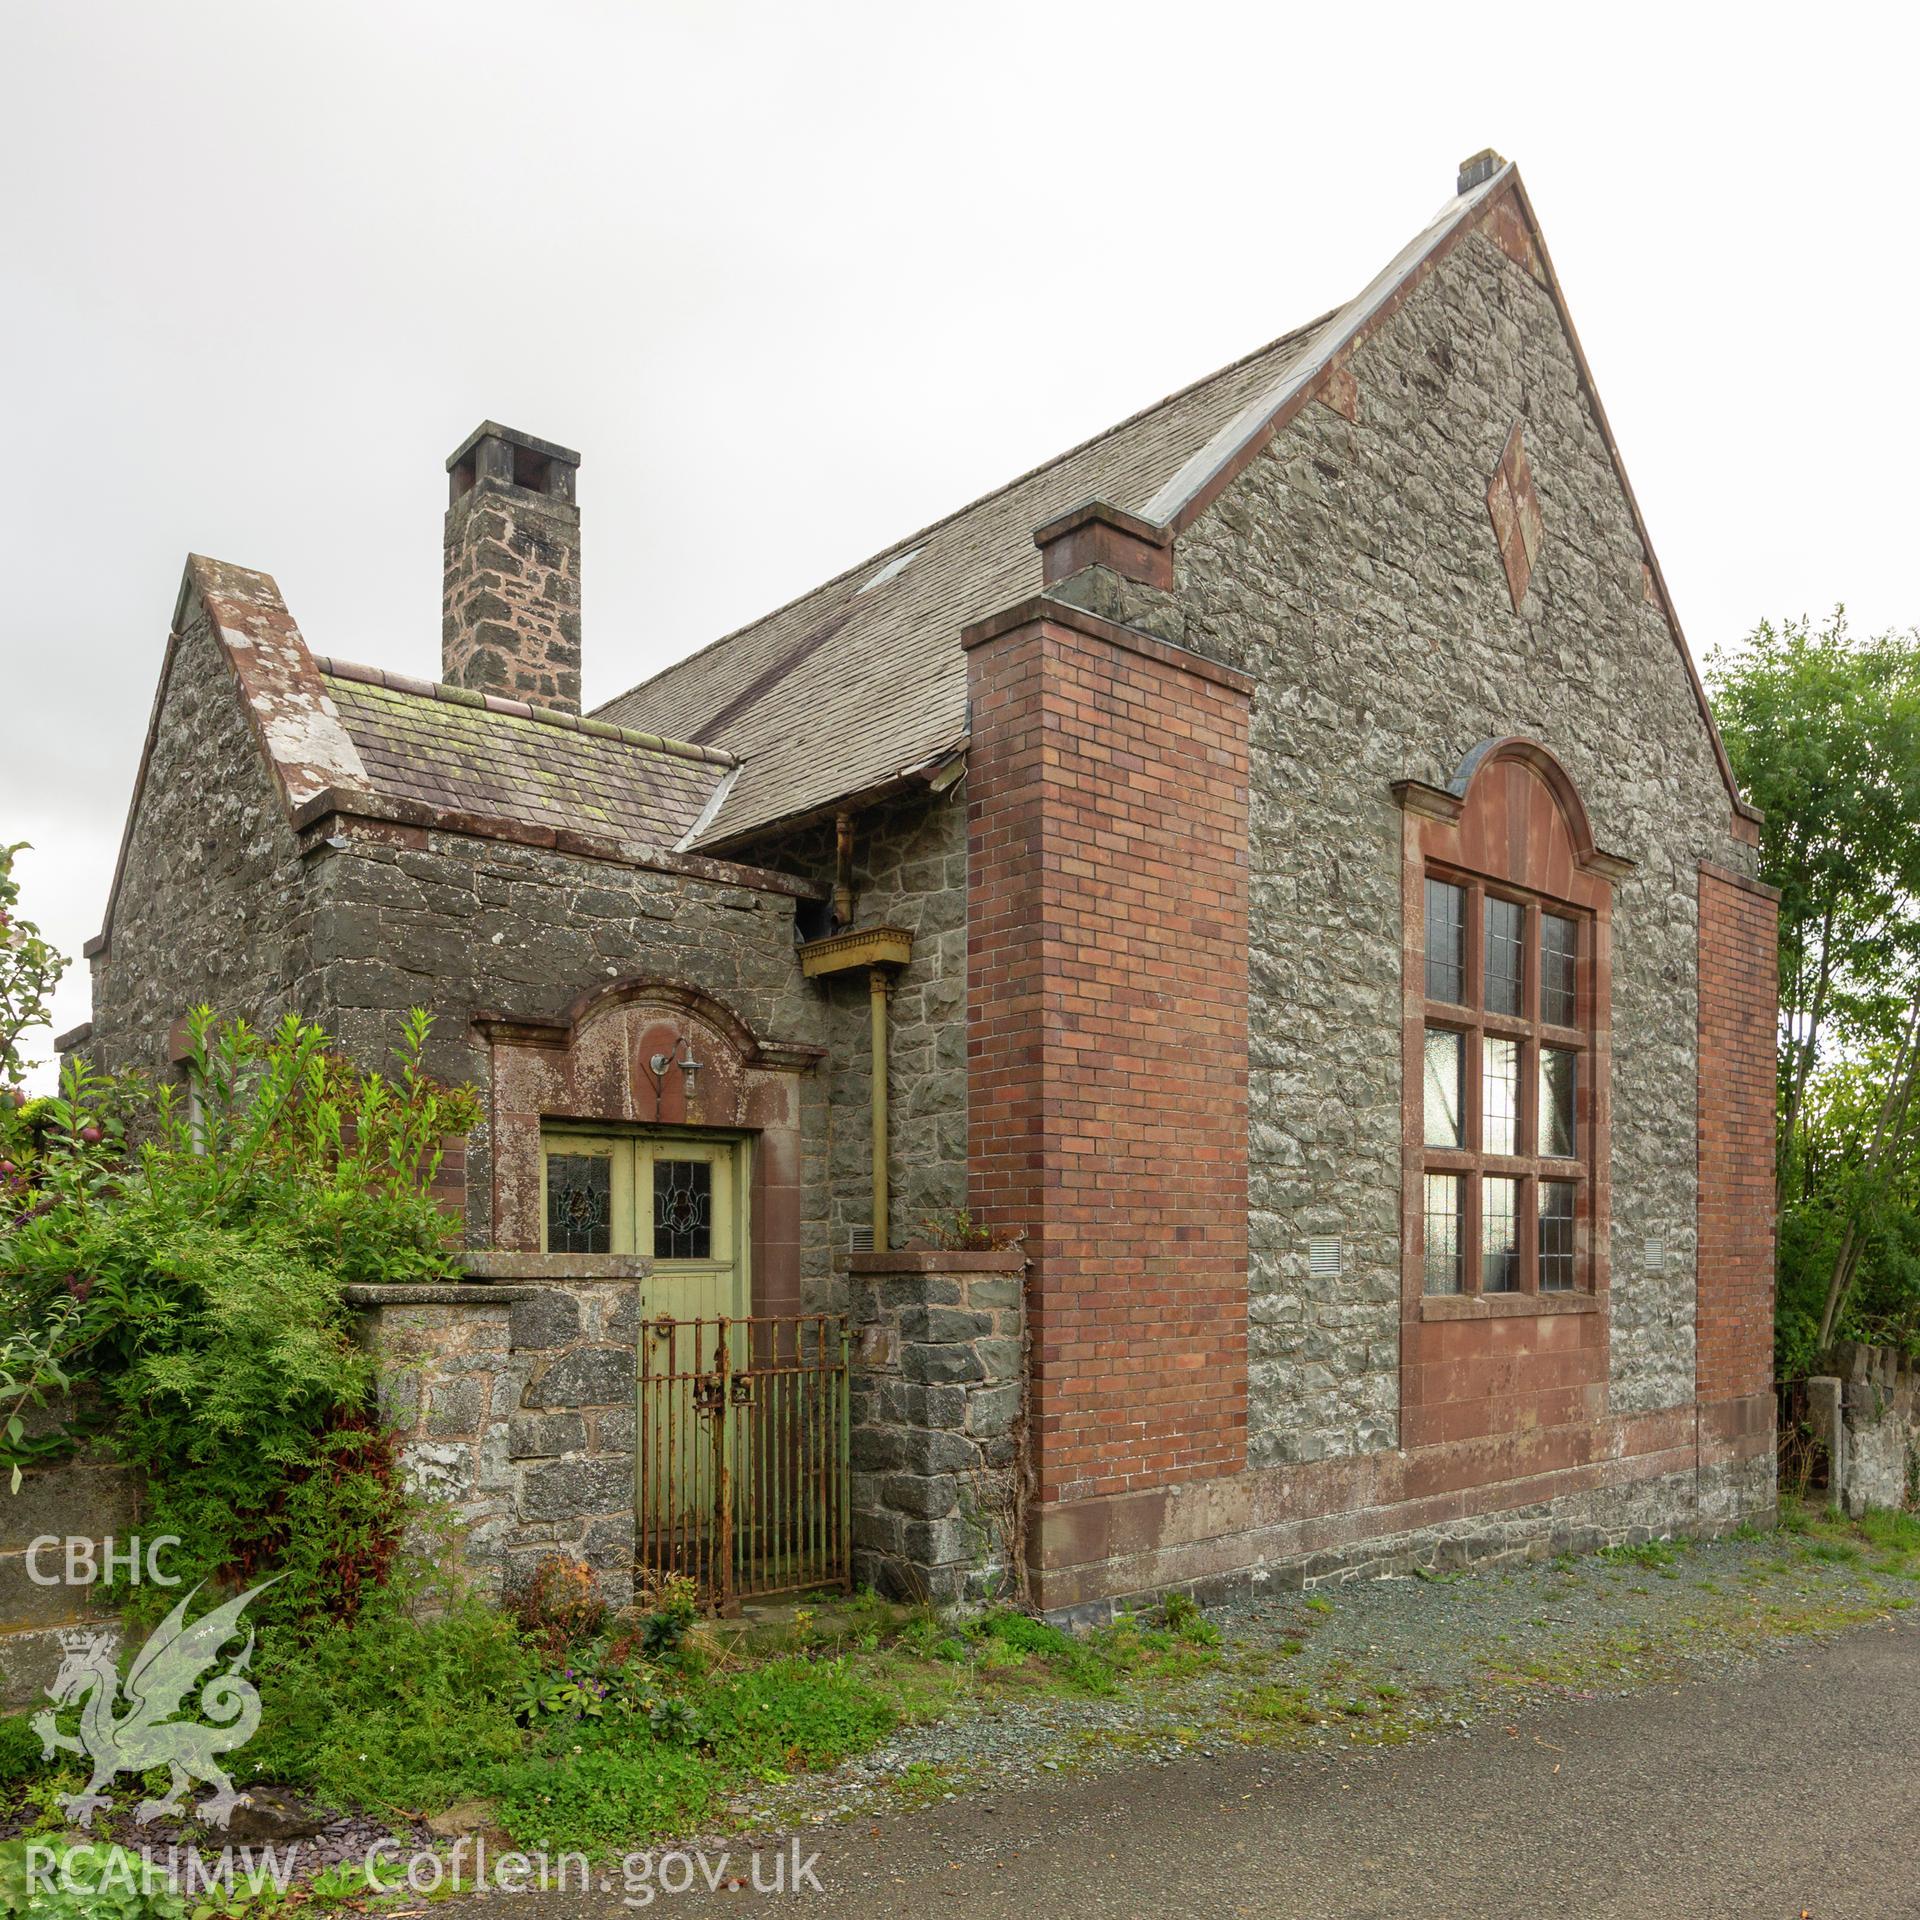 Colour photograph showing front elevation and entrance of Bwlch-y-Cibau Methodist Chapel near Meifod. Photographed by Richard Barrett on 9th September 2018.